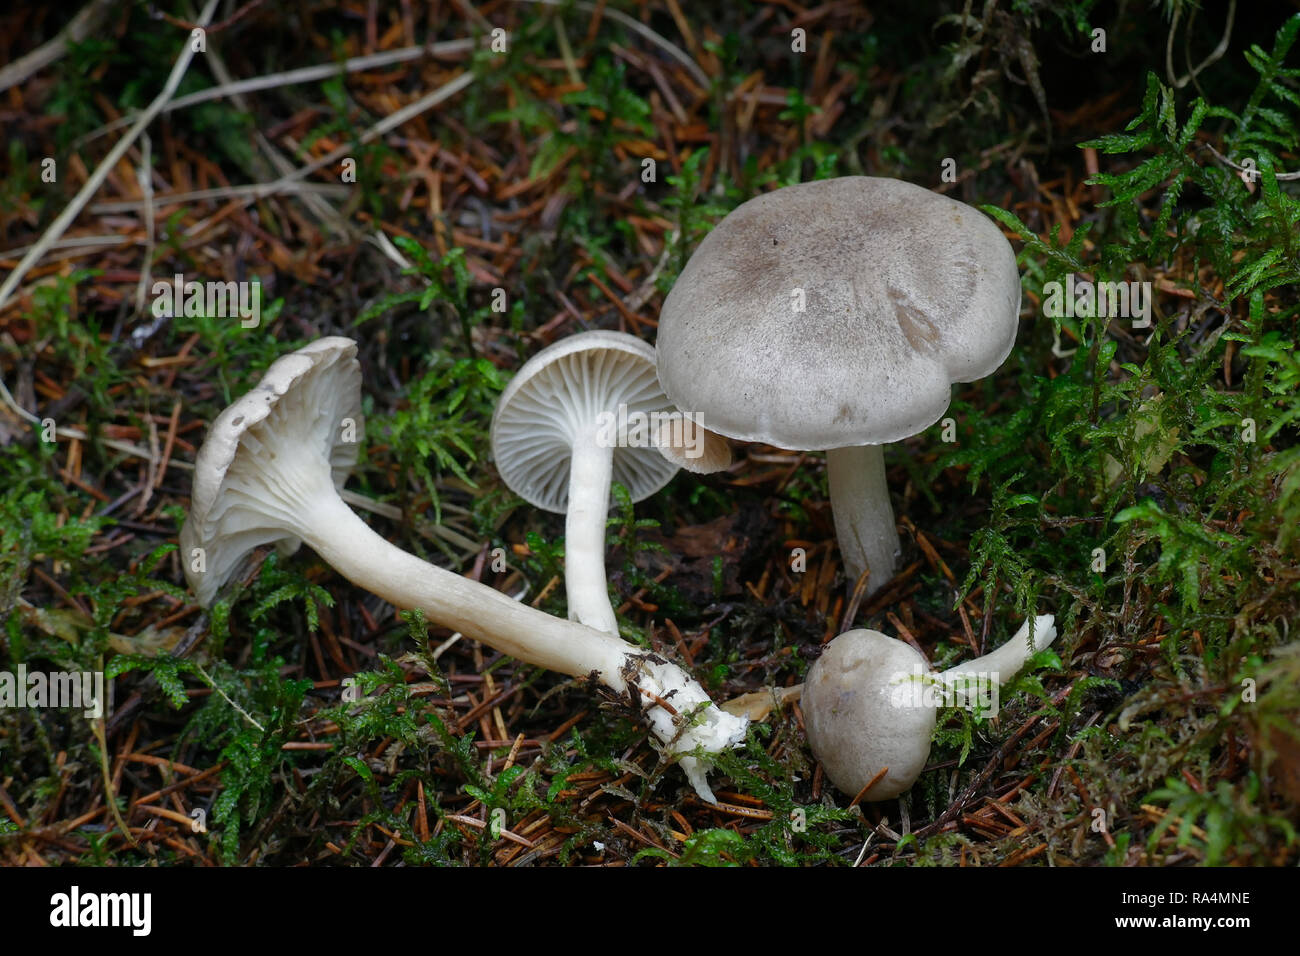 Hygrophorus agathosmus, commonly known as the gray almond waxy cap or the almond woodwax Stock Photo